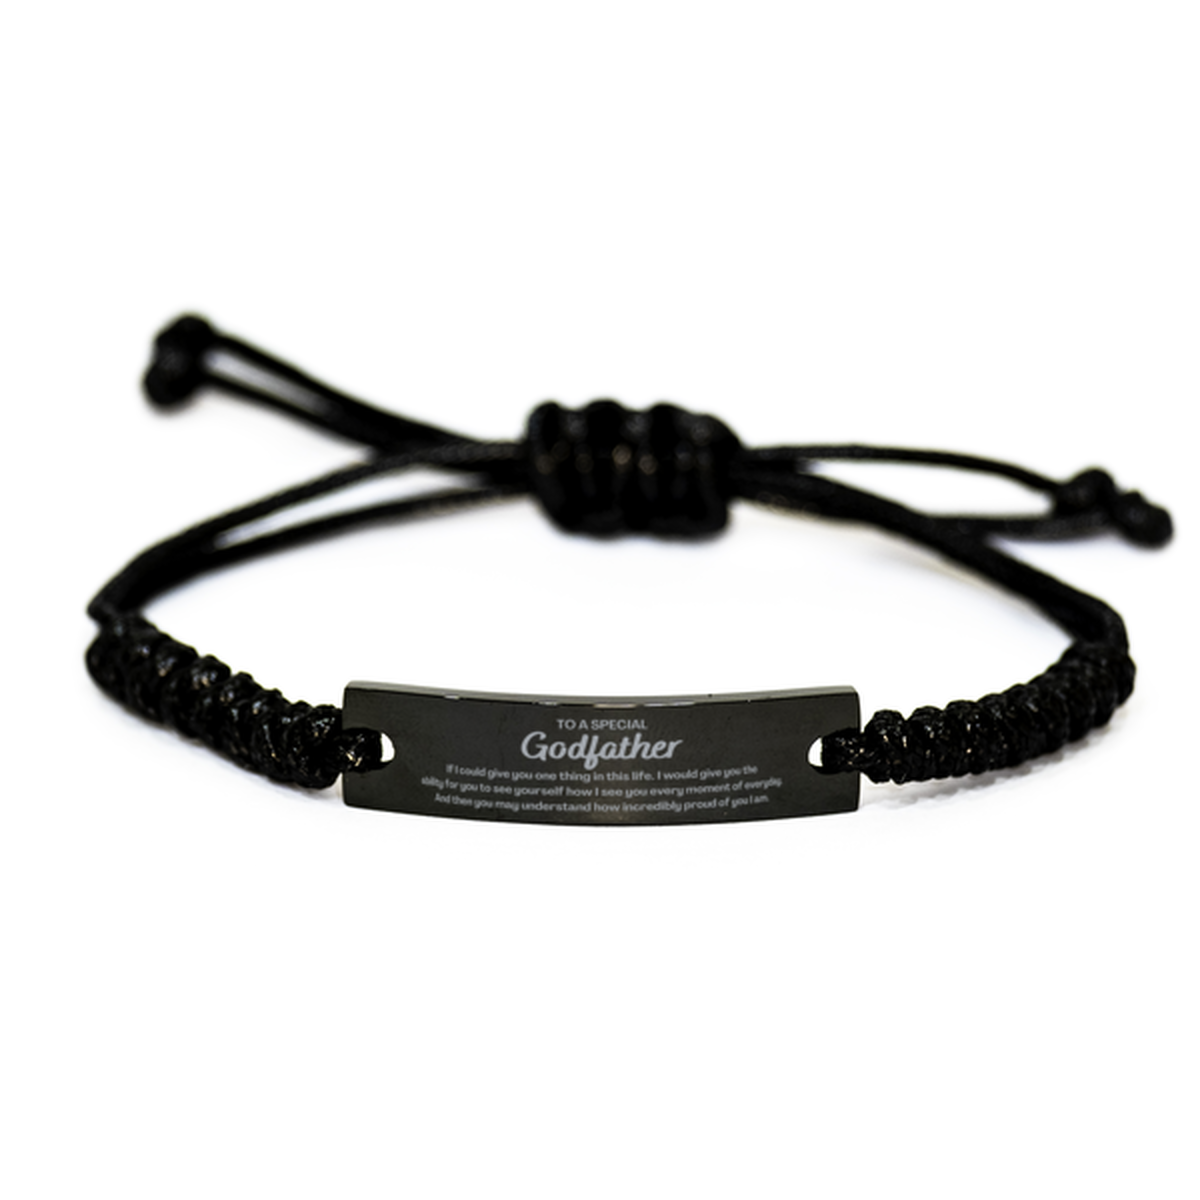 To My Godfather Black Rope Bracelet, Gifts For Godfather Engraved, Inspirational Gifts for Christmas Birthday, Epic Gifts for Godfather To A Special Godfather how incredibly proud of you I am